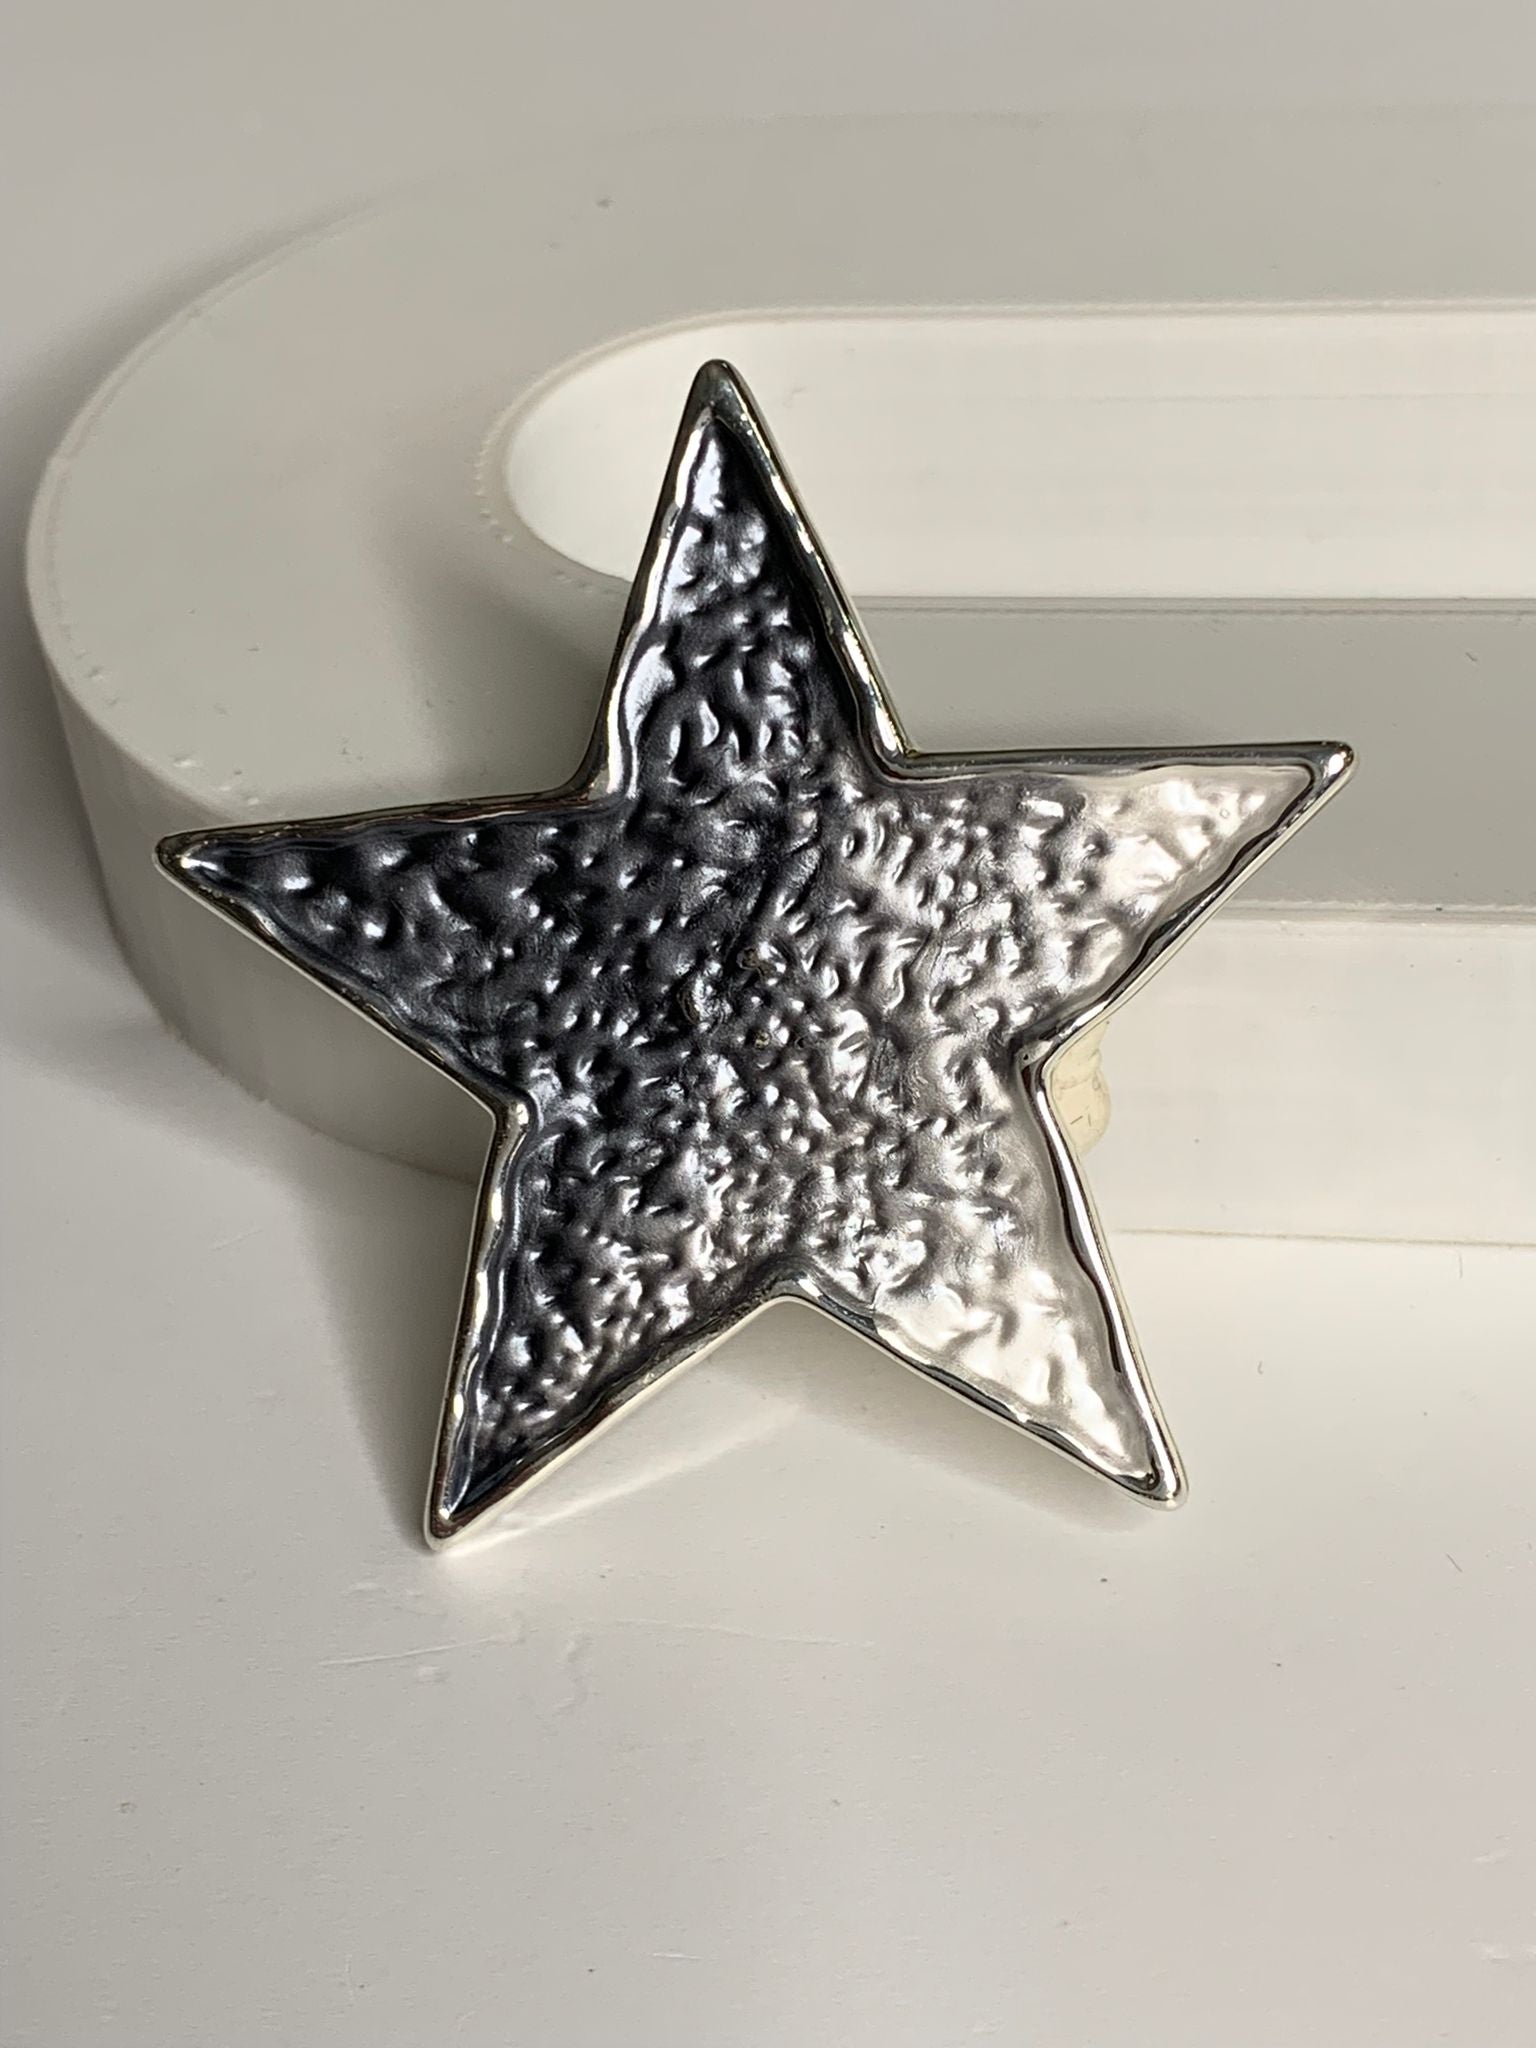 Magnetic brooch & scarf clip - 'star' design in shades of shiny silver, matte black, matte grey and matte white